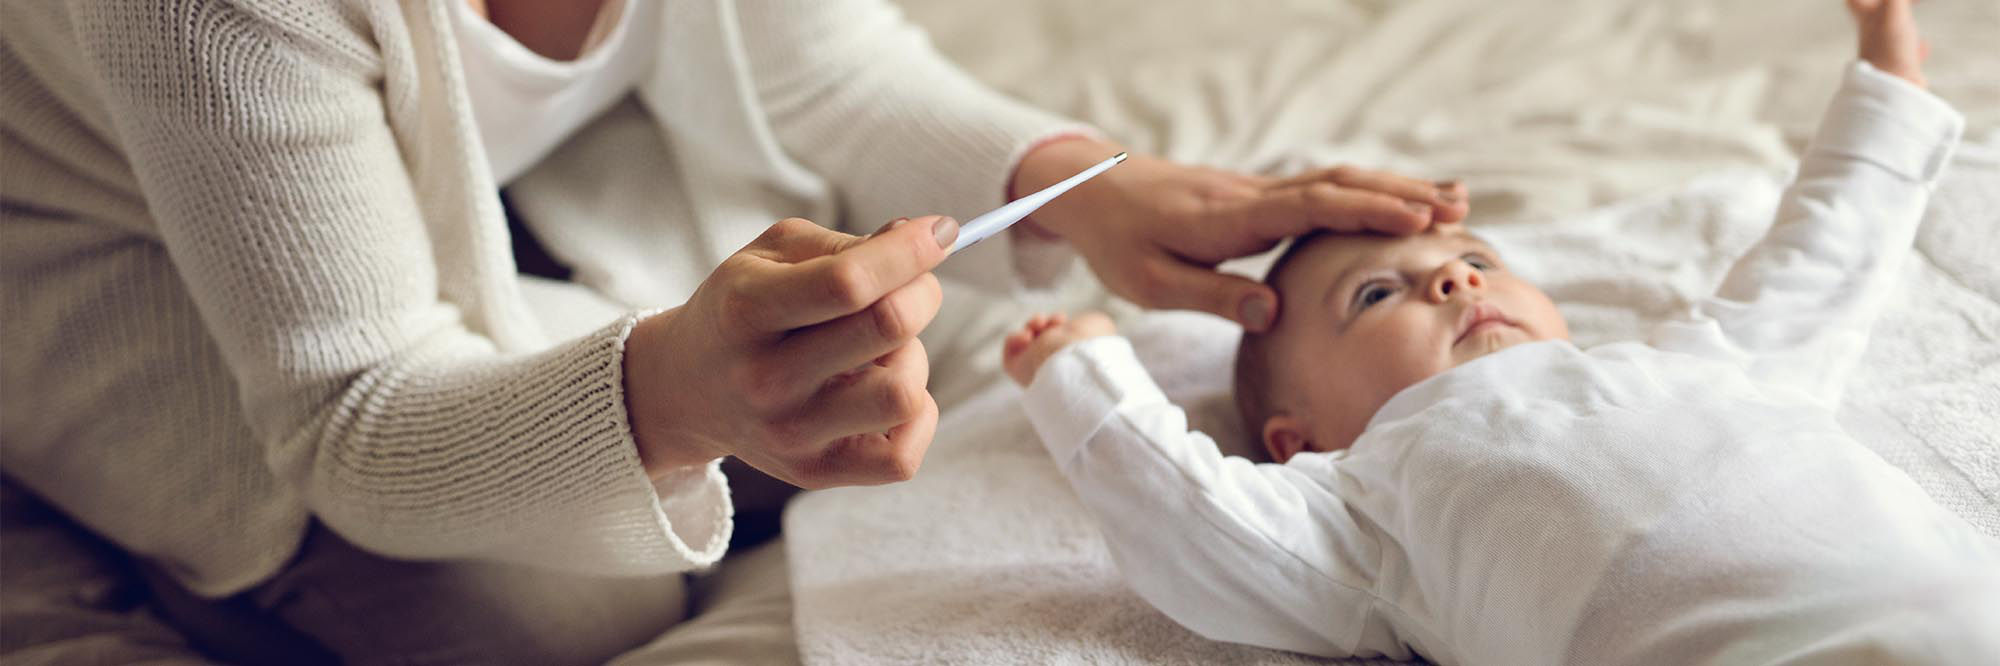 when should you go to the hospital for a fever toddler